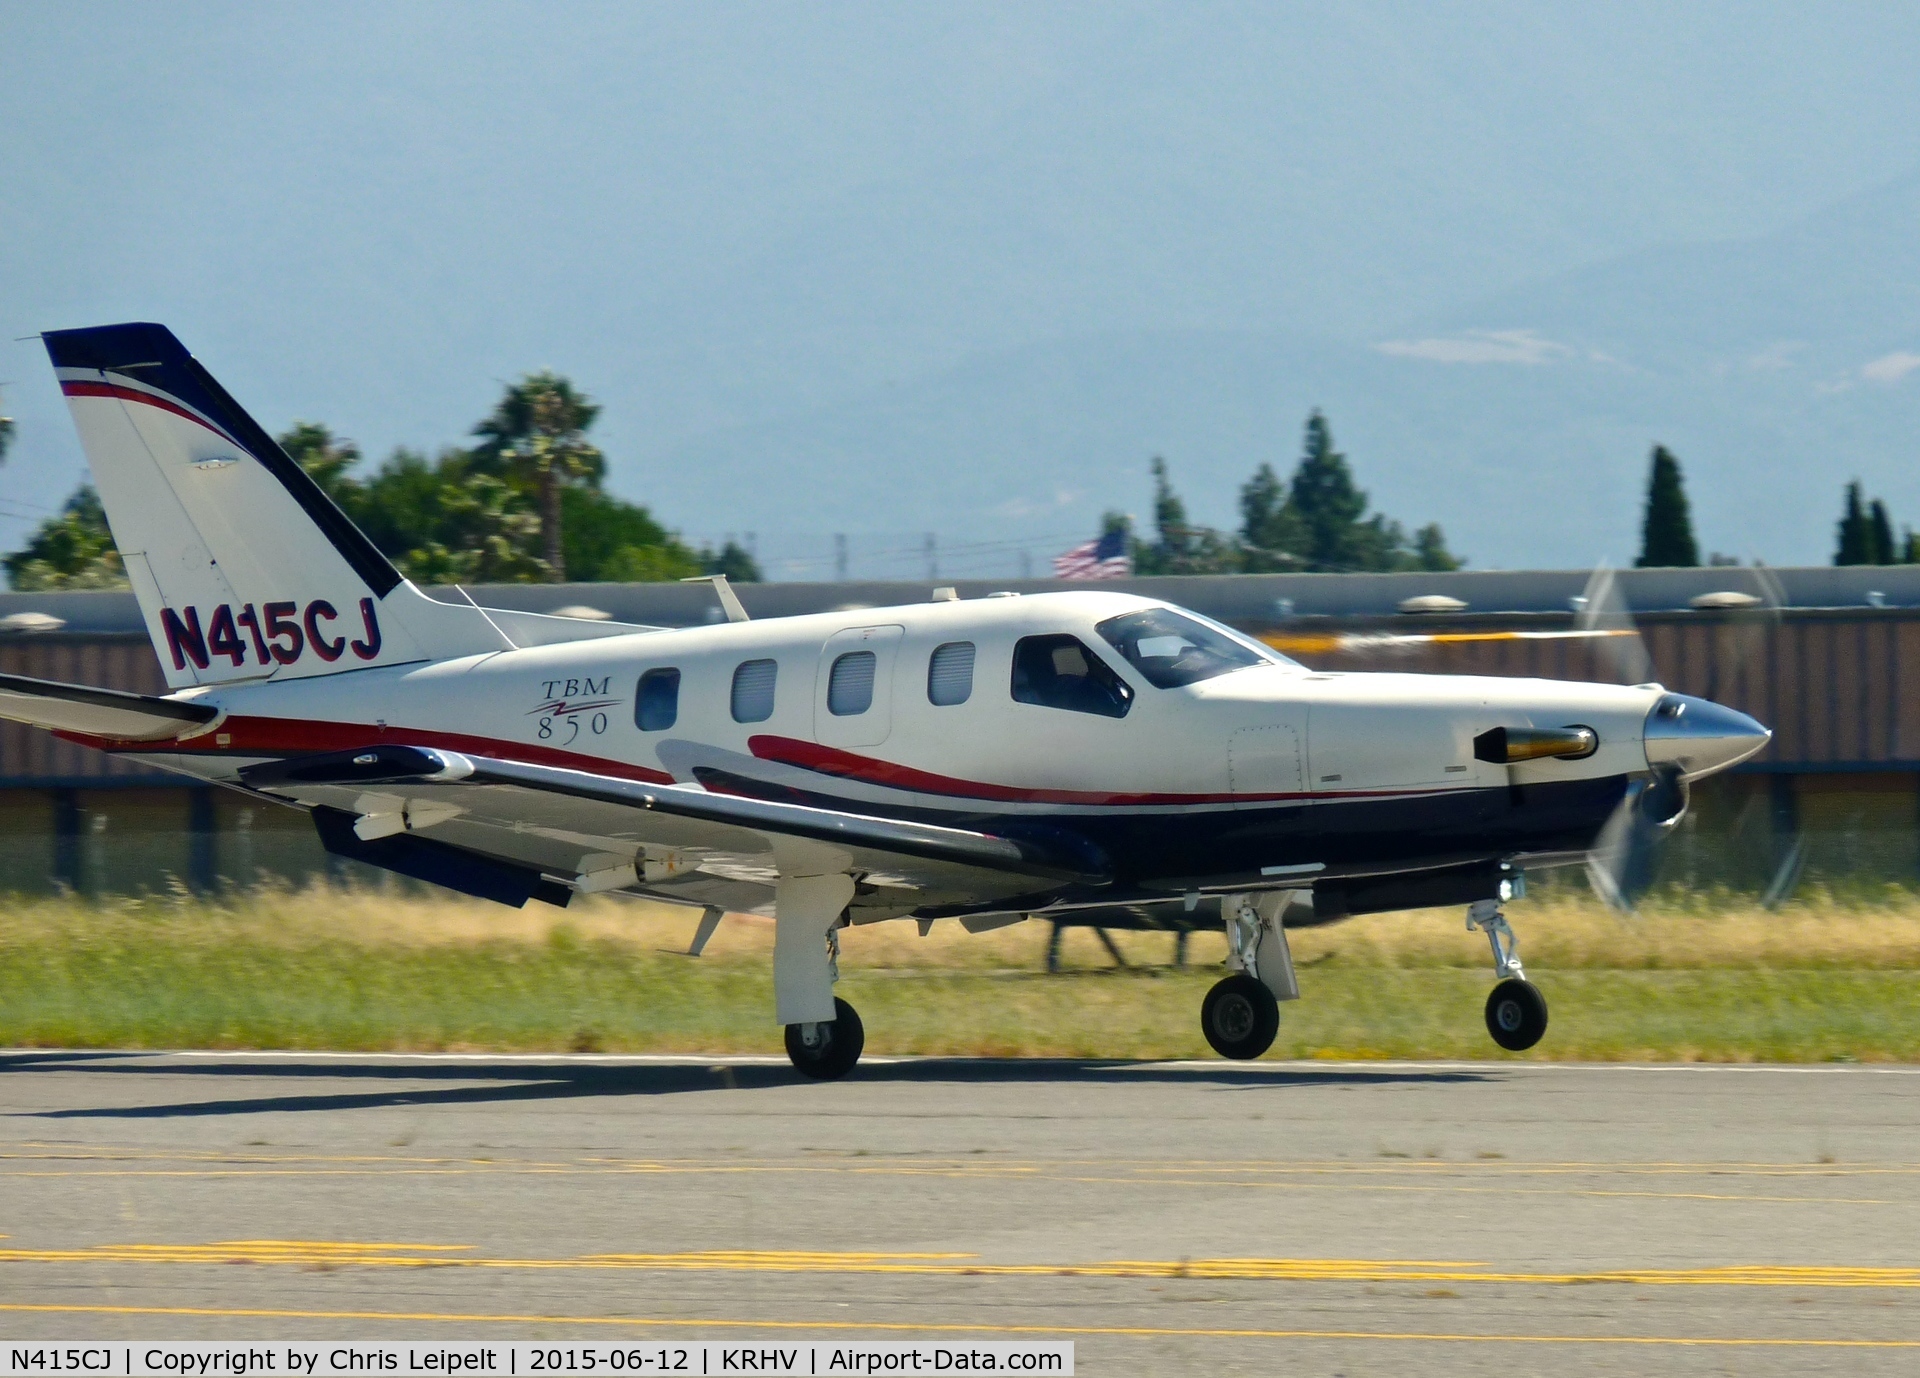 N415CJ, 2007 Socata TBM-700 C/N 415, Likely the last pic I'll ever post of this TBM on Airport-Data. It was recently sold and the owners upgraded to a Pilatus PC-12, so expect a lot of pics of N168AJ instead of N415CJ now. Keep flying high N415CJ..